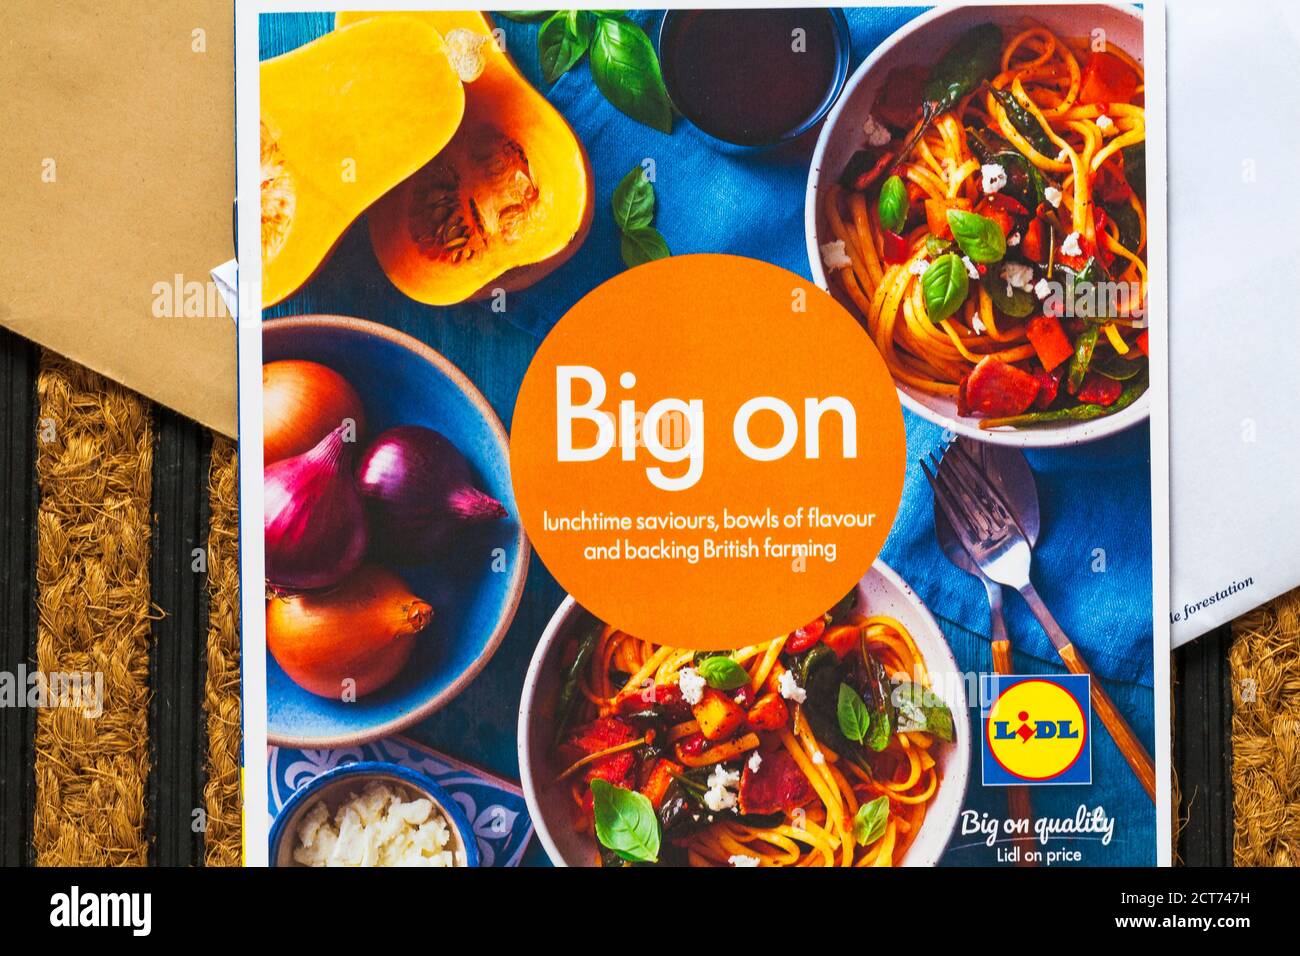 unsolicited mail junk mail on doormat - big on quality Lidl on price - big on lunchtime saviours, bowls of flavour and backing British farming booklet Stock Photo